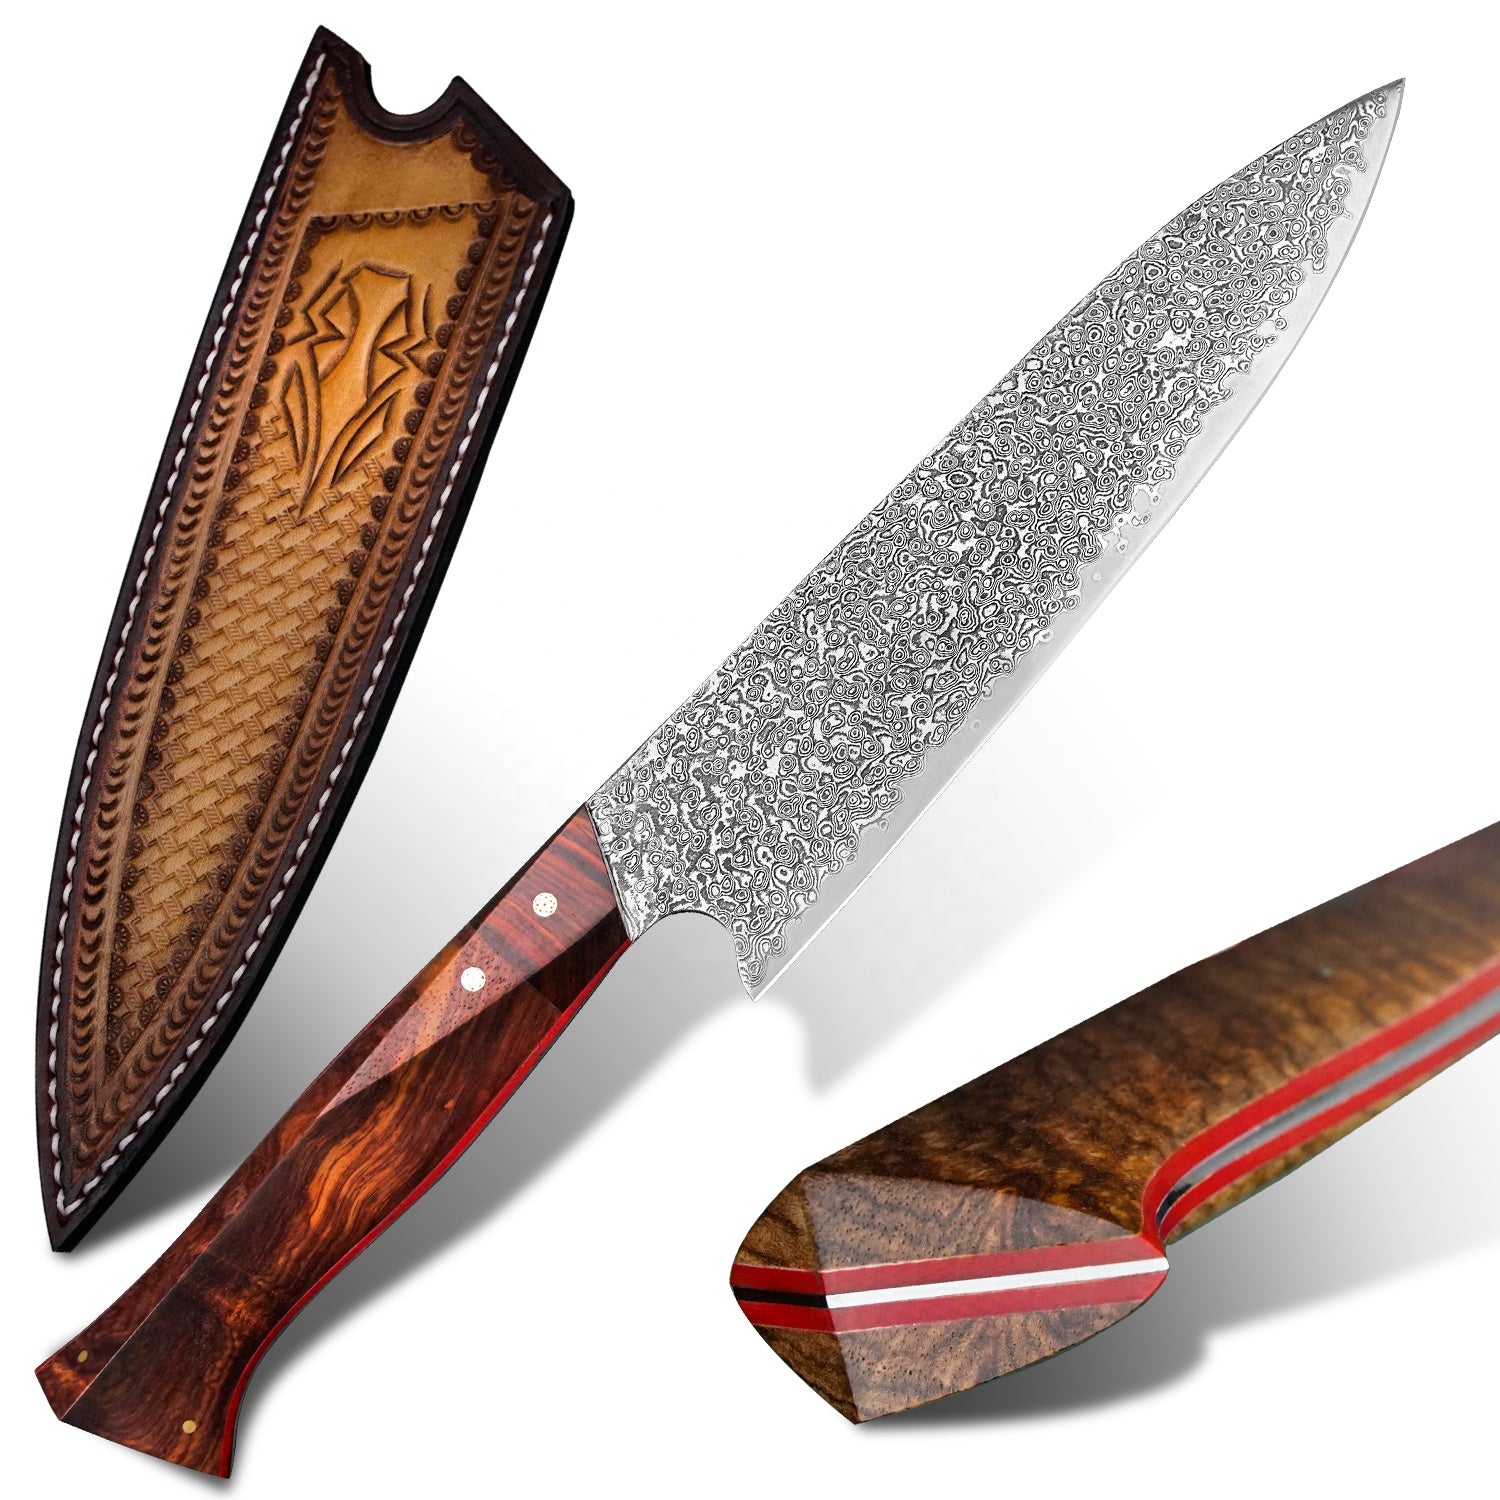 Full view of Professional handmade, hand forged 8 inch rosewood handle Damascus steel Japanese kitchen chef knife with free leather sheath 